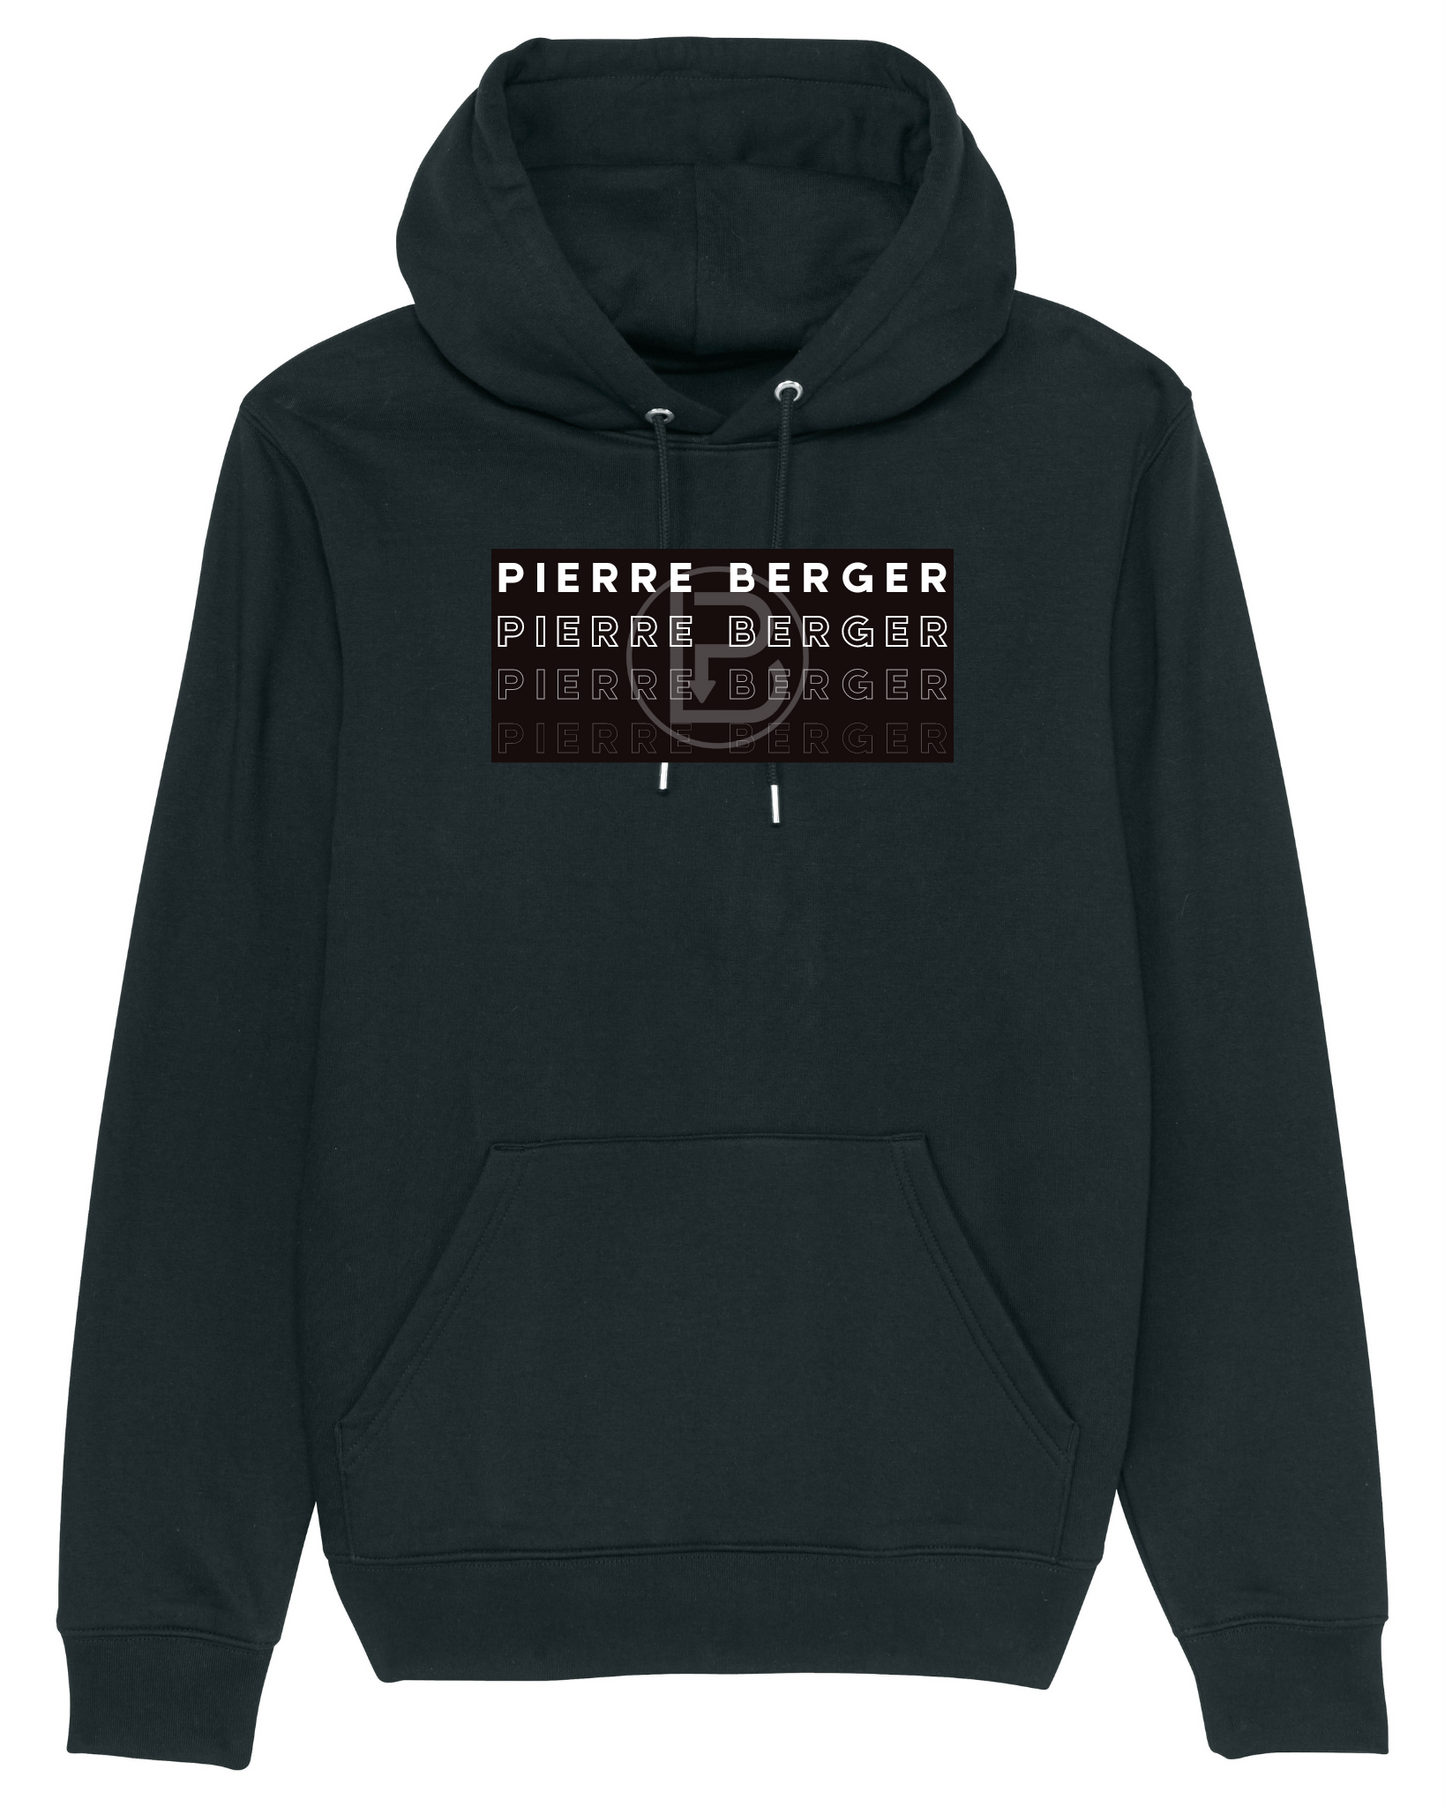 PIERRE BERGER - Unisex Hoodie Black White Simple Typhography 100% recycled